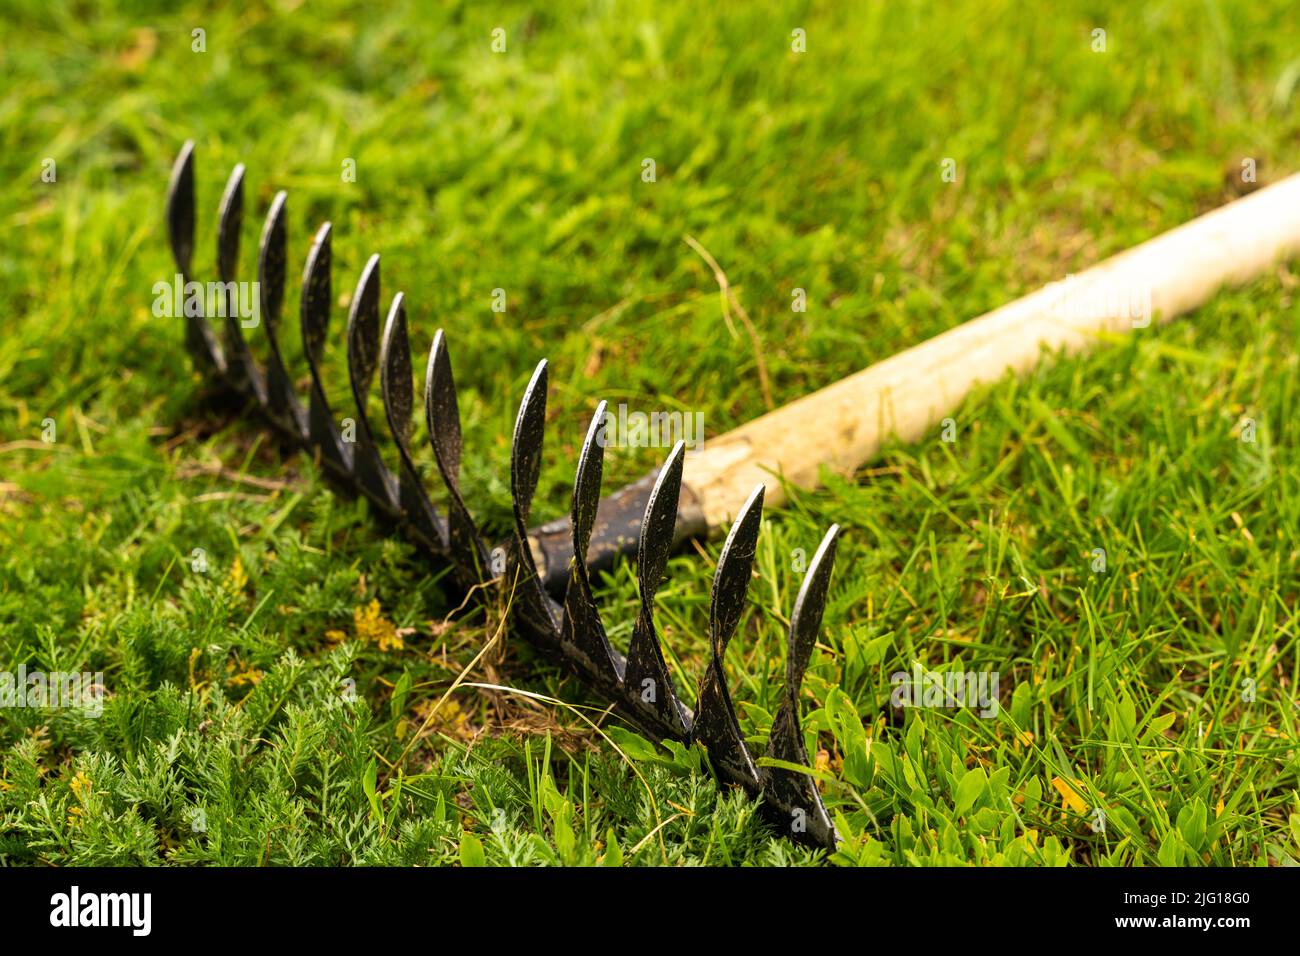 a metal garden rake with a wooden handle lies on a green lawn Stock ...